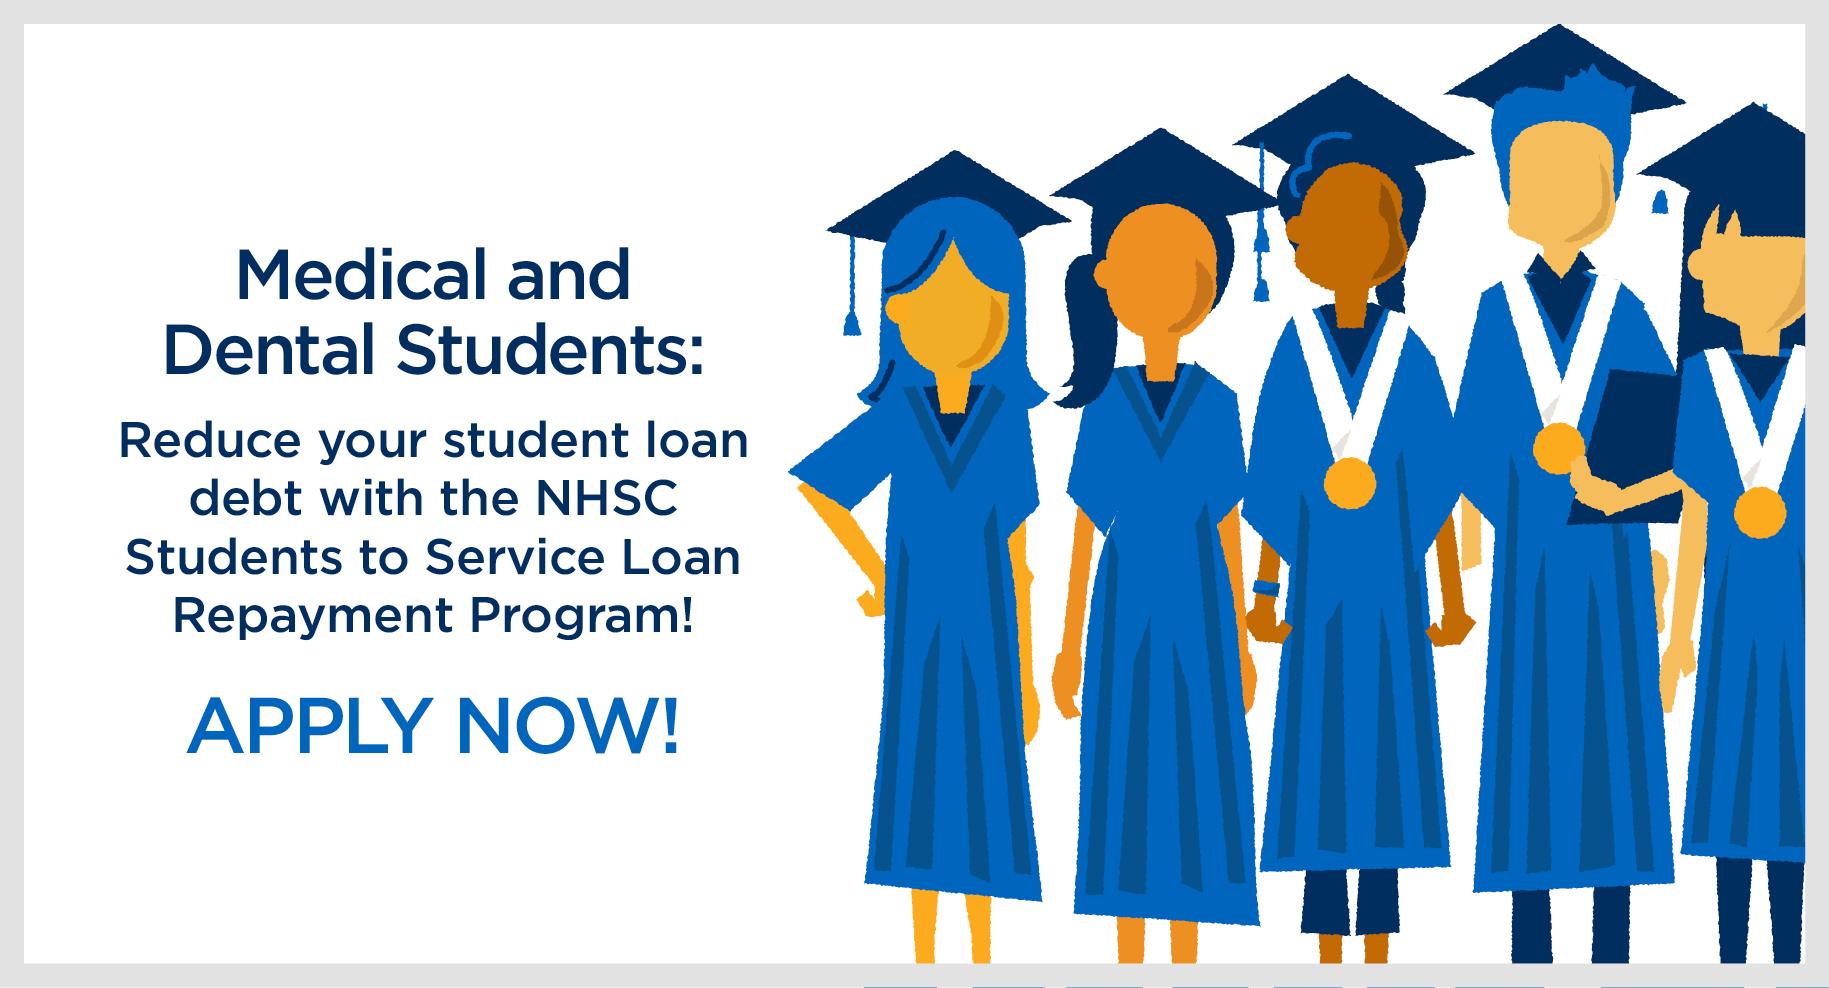 Medical and dental students: Reduce your student loan debt with the NHSC Students to Service Loan Repayment Program